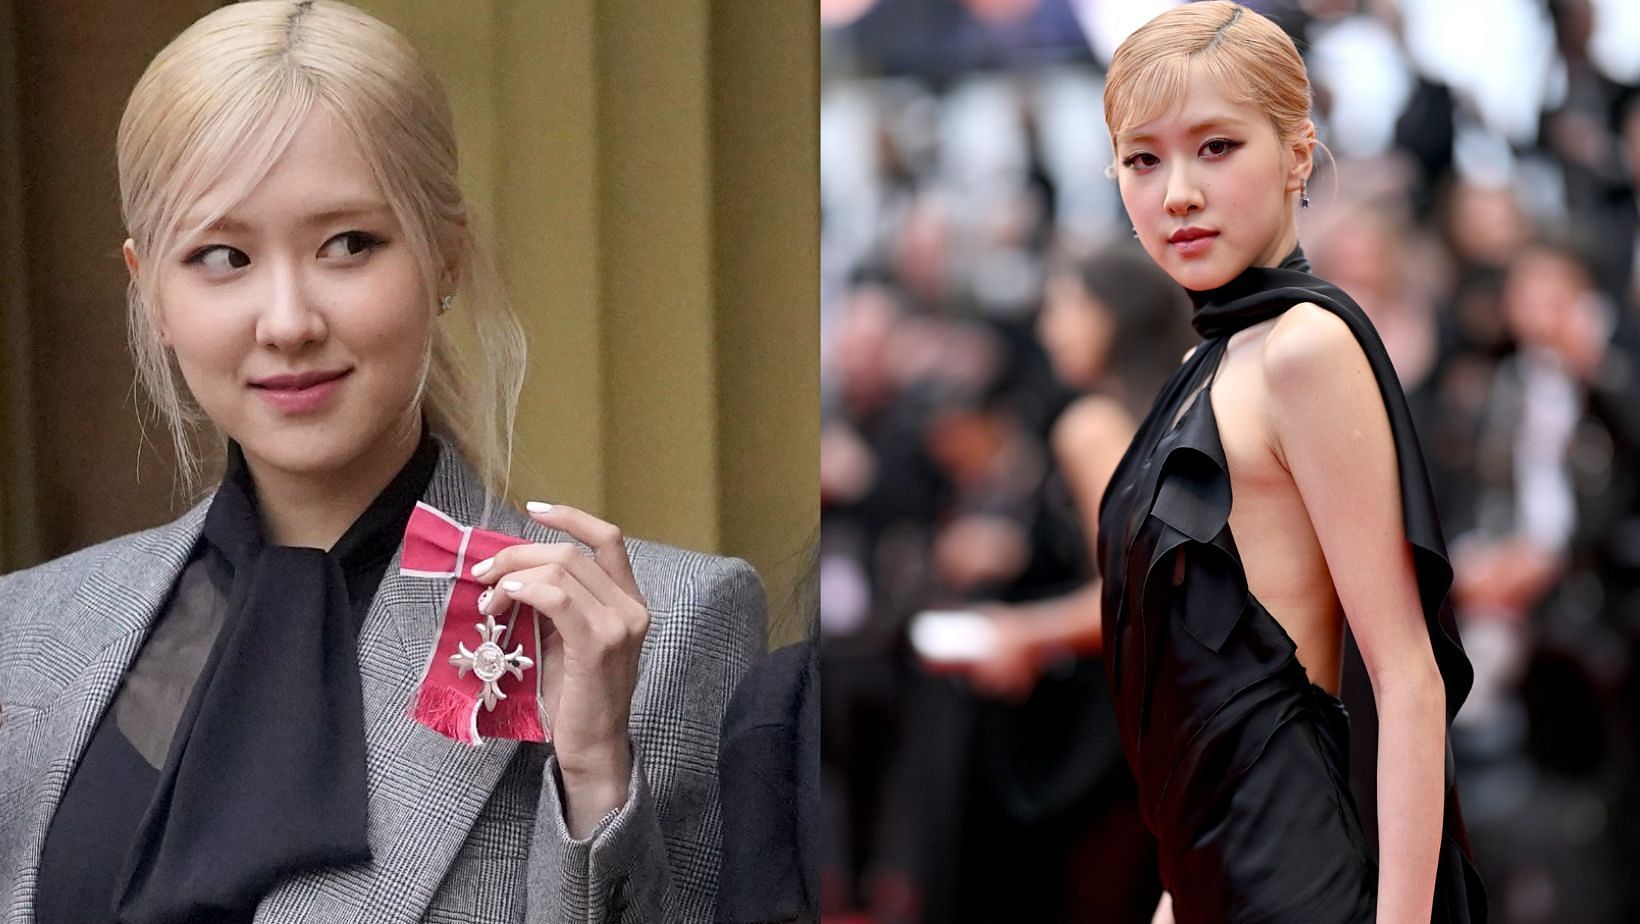 BLACKPINK&rsquo;s Ros&eacute; eligible to get married at the same church as Princess Diana. (Images via X/@skzpinkfiles @RoyalFamily)